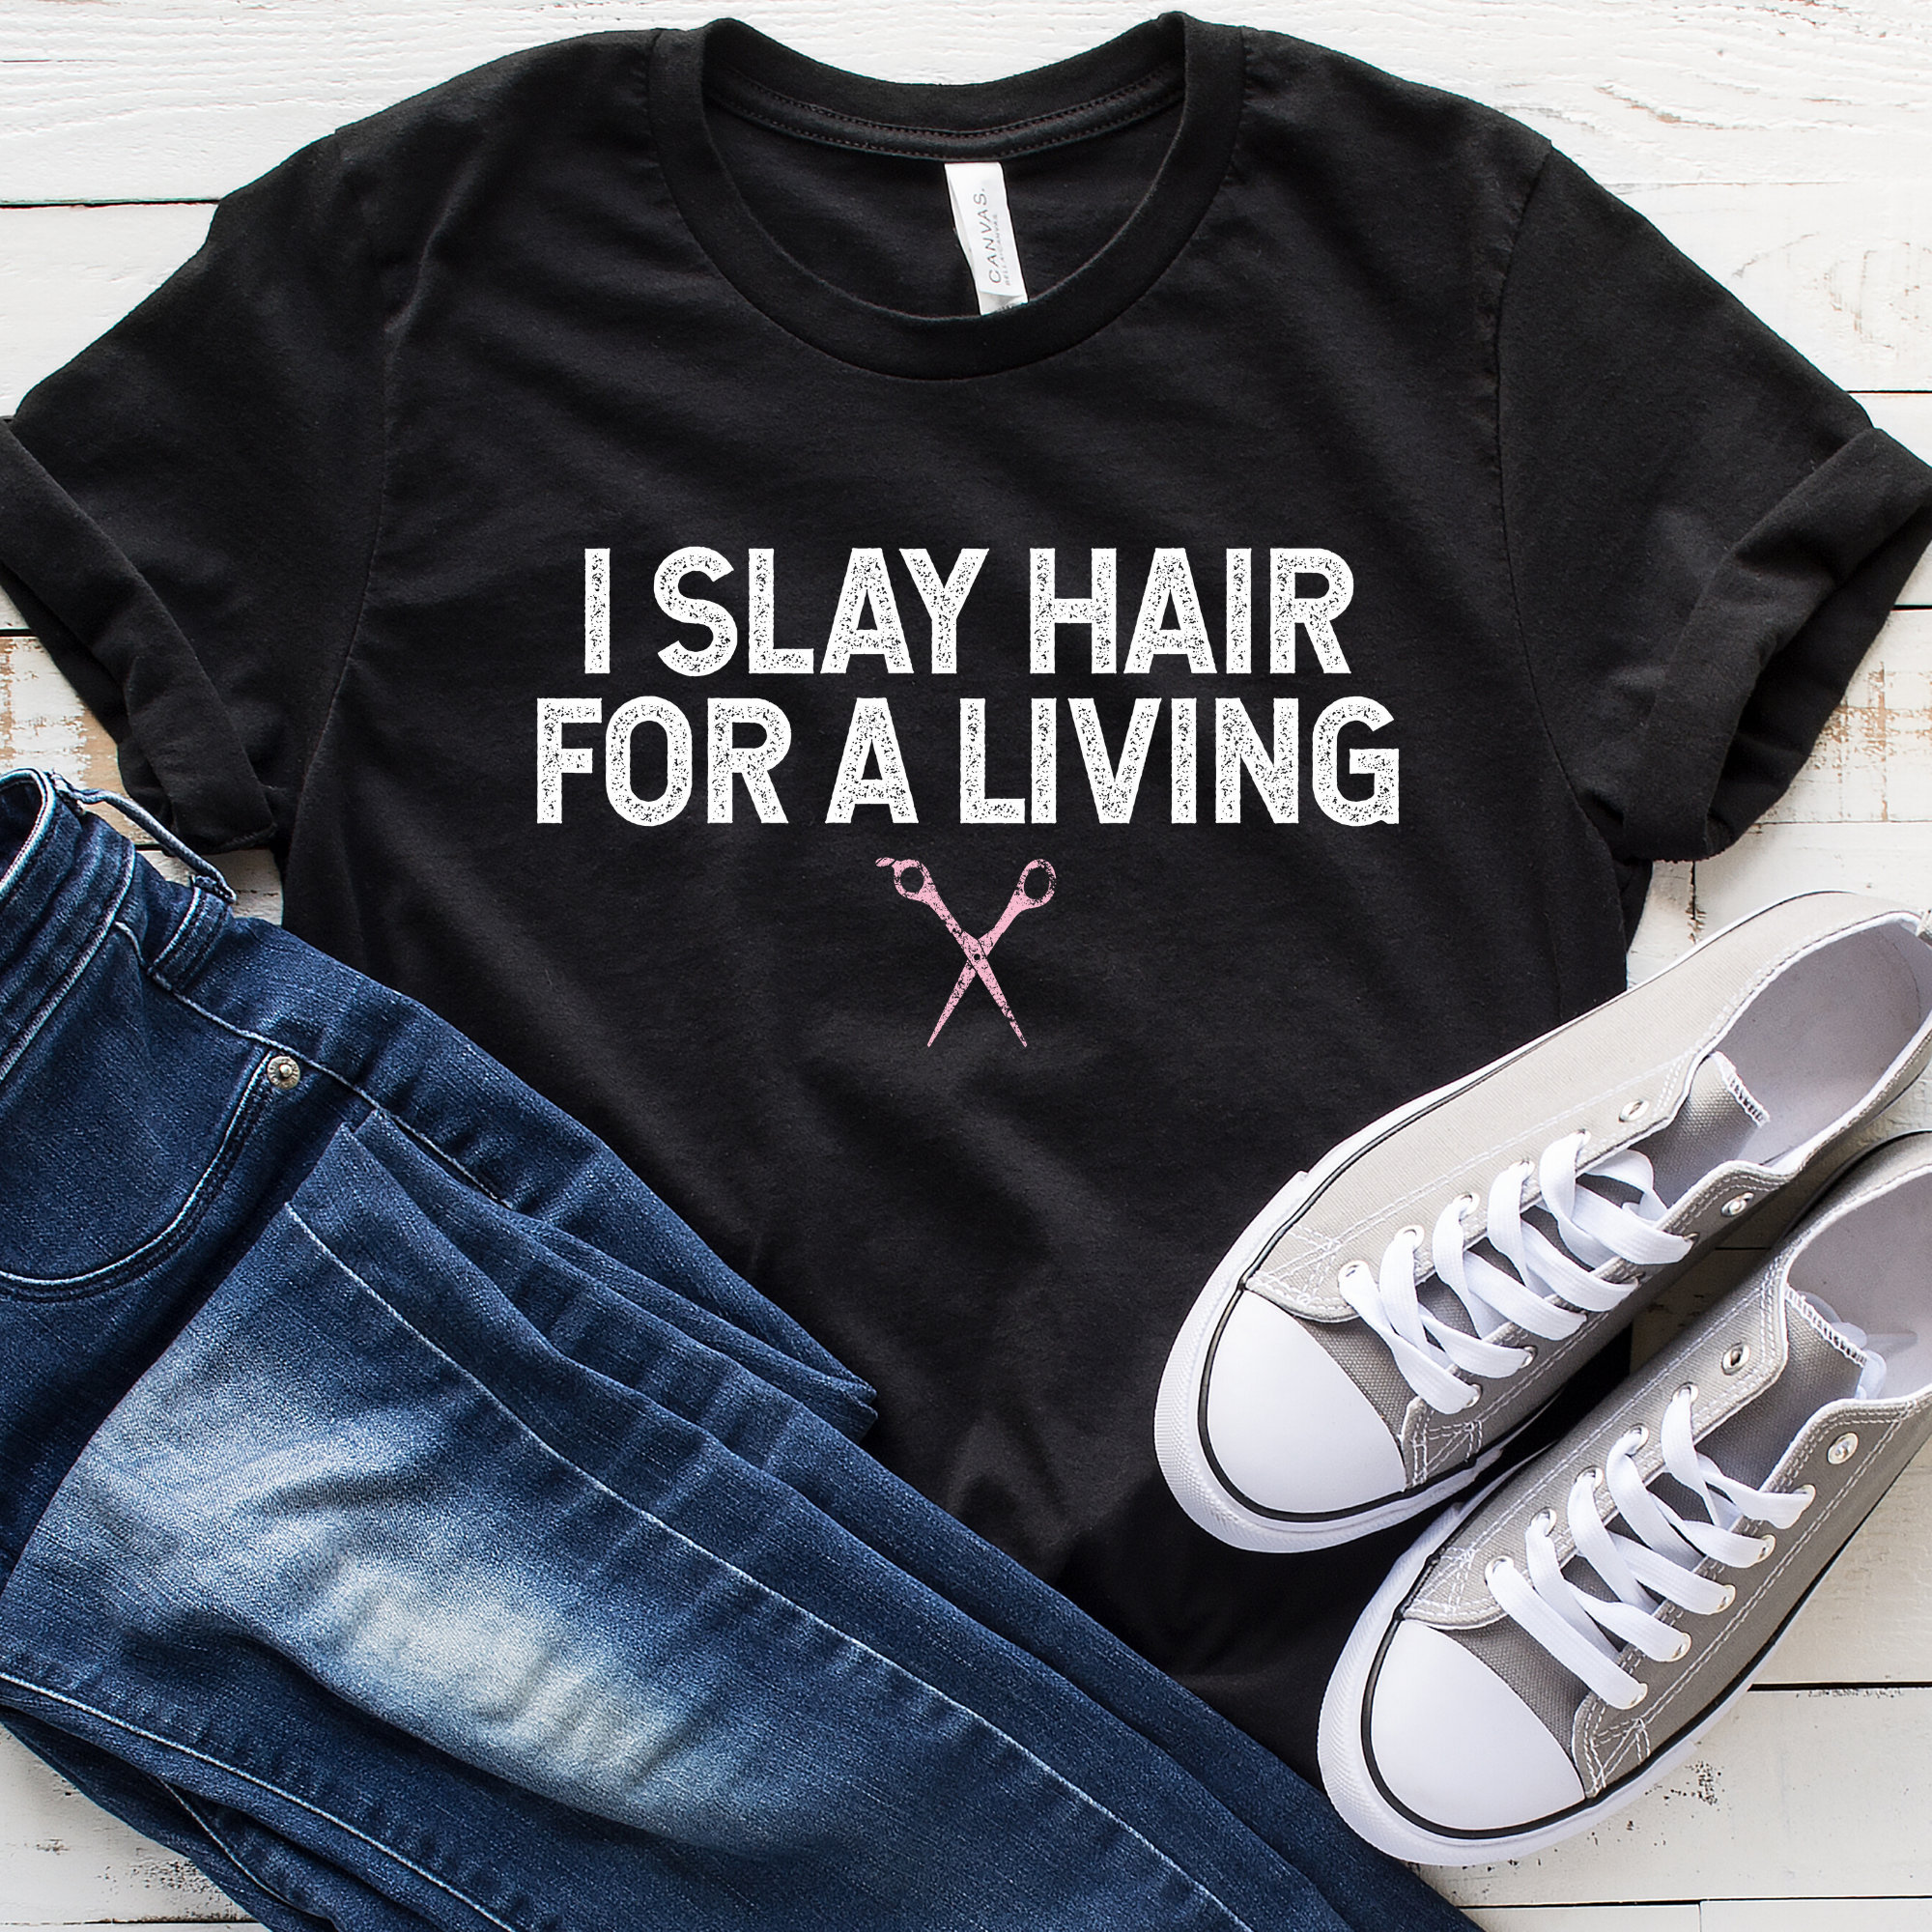 Cute and Cheeky Shirt for Hairdressers